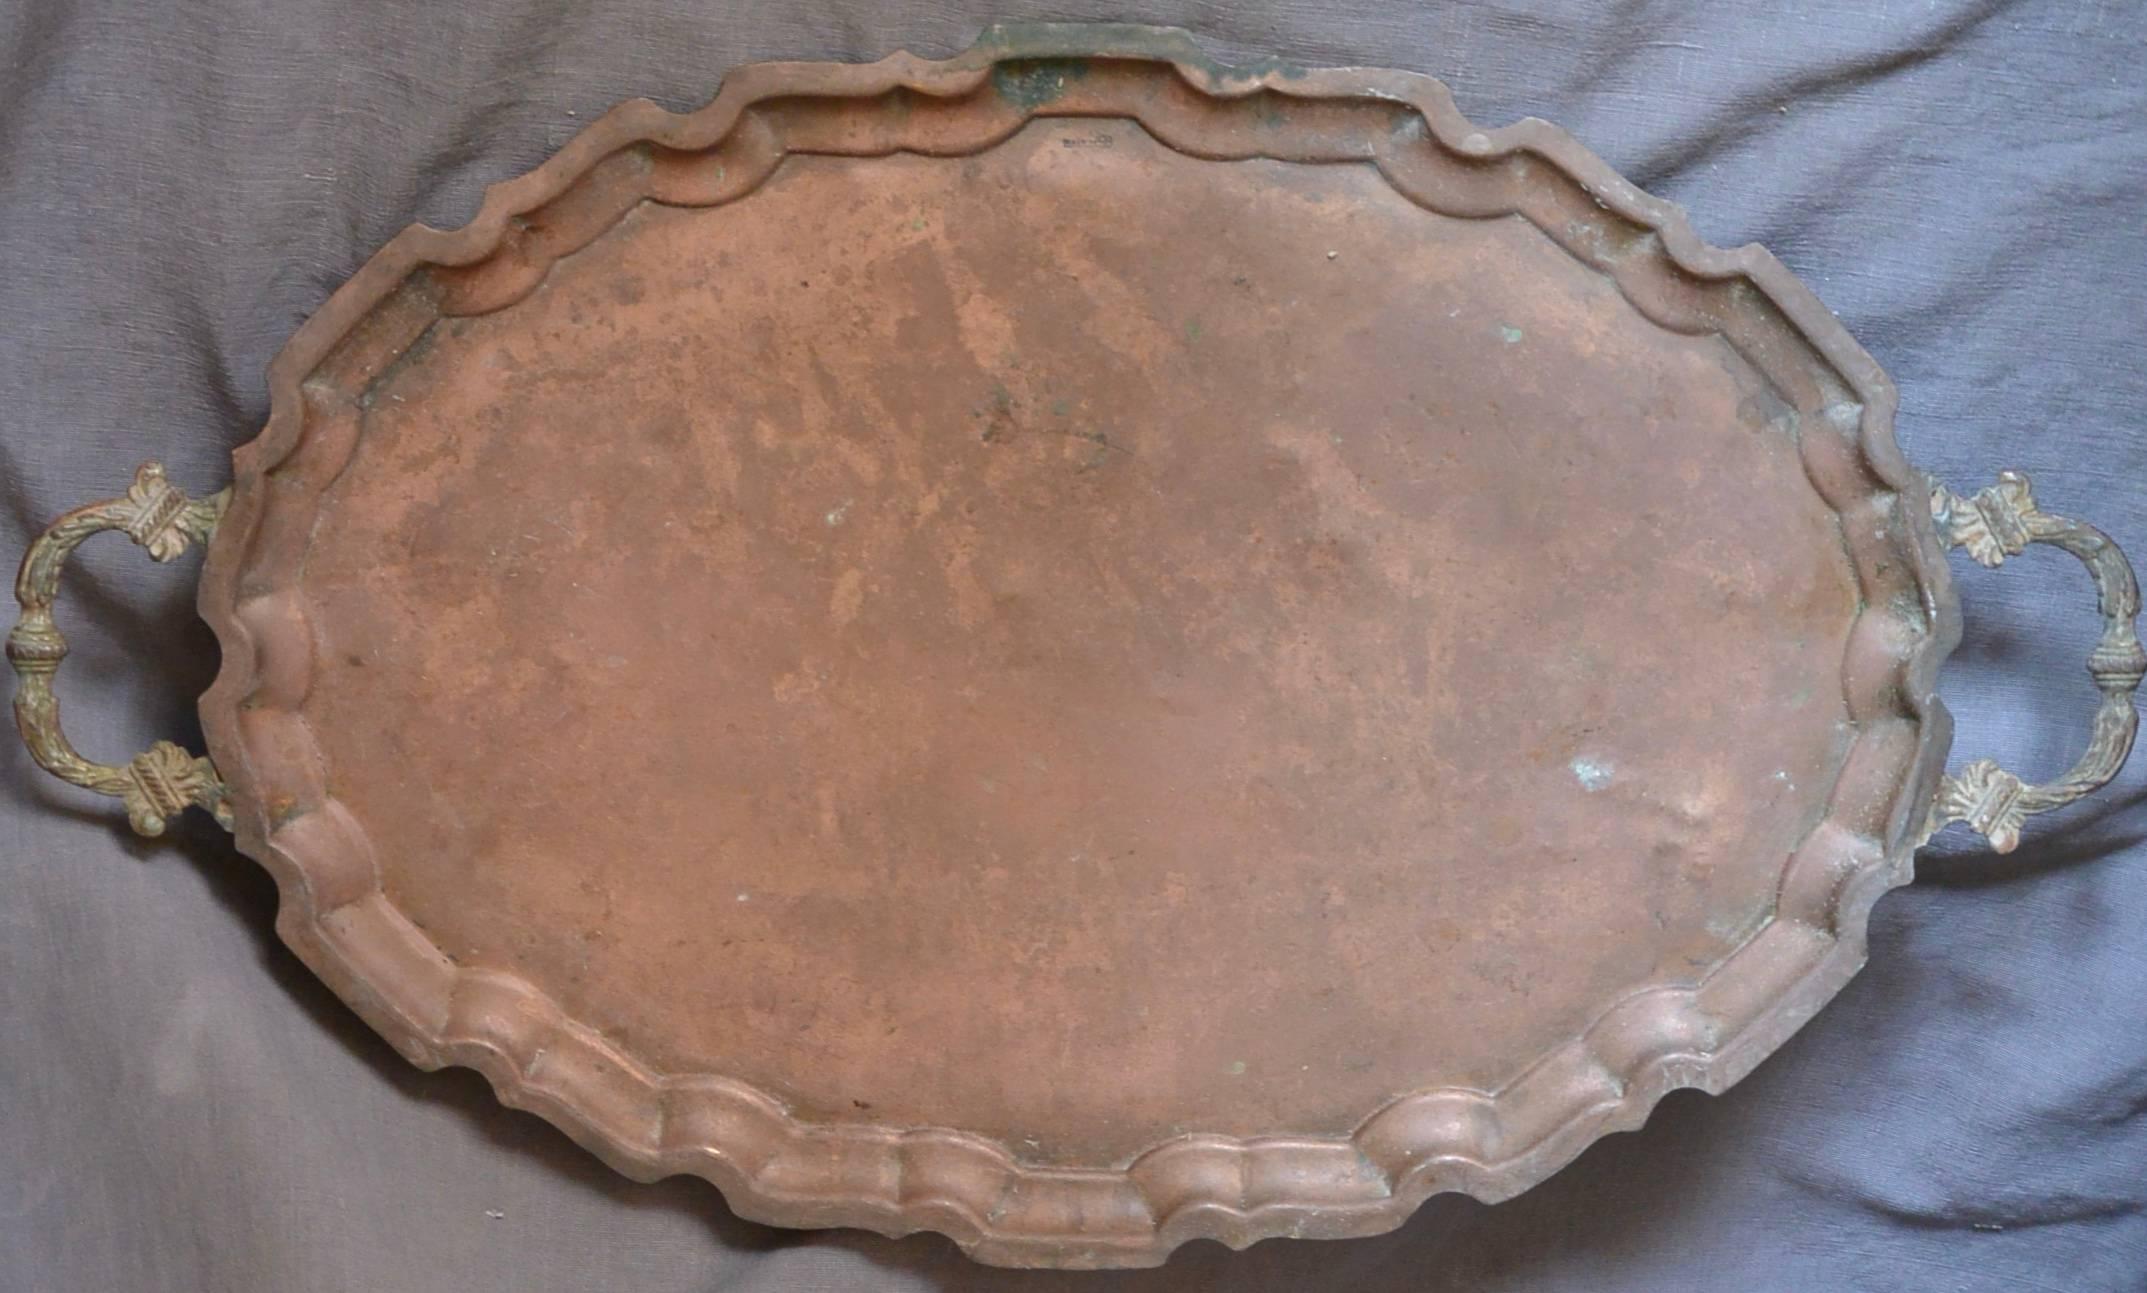 Oval shaped two-handled tray with scalloped edge, Egypt, circa 1930
Dimensions: 25